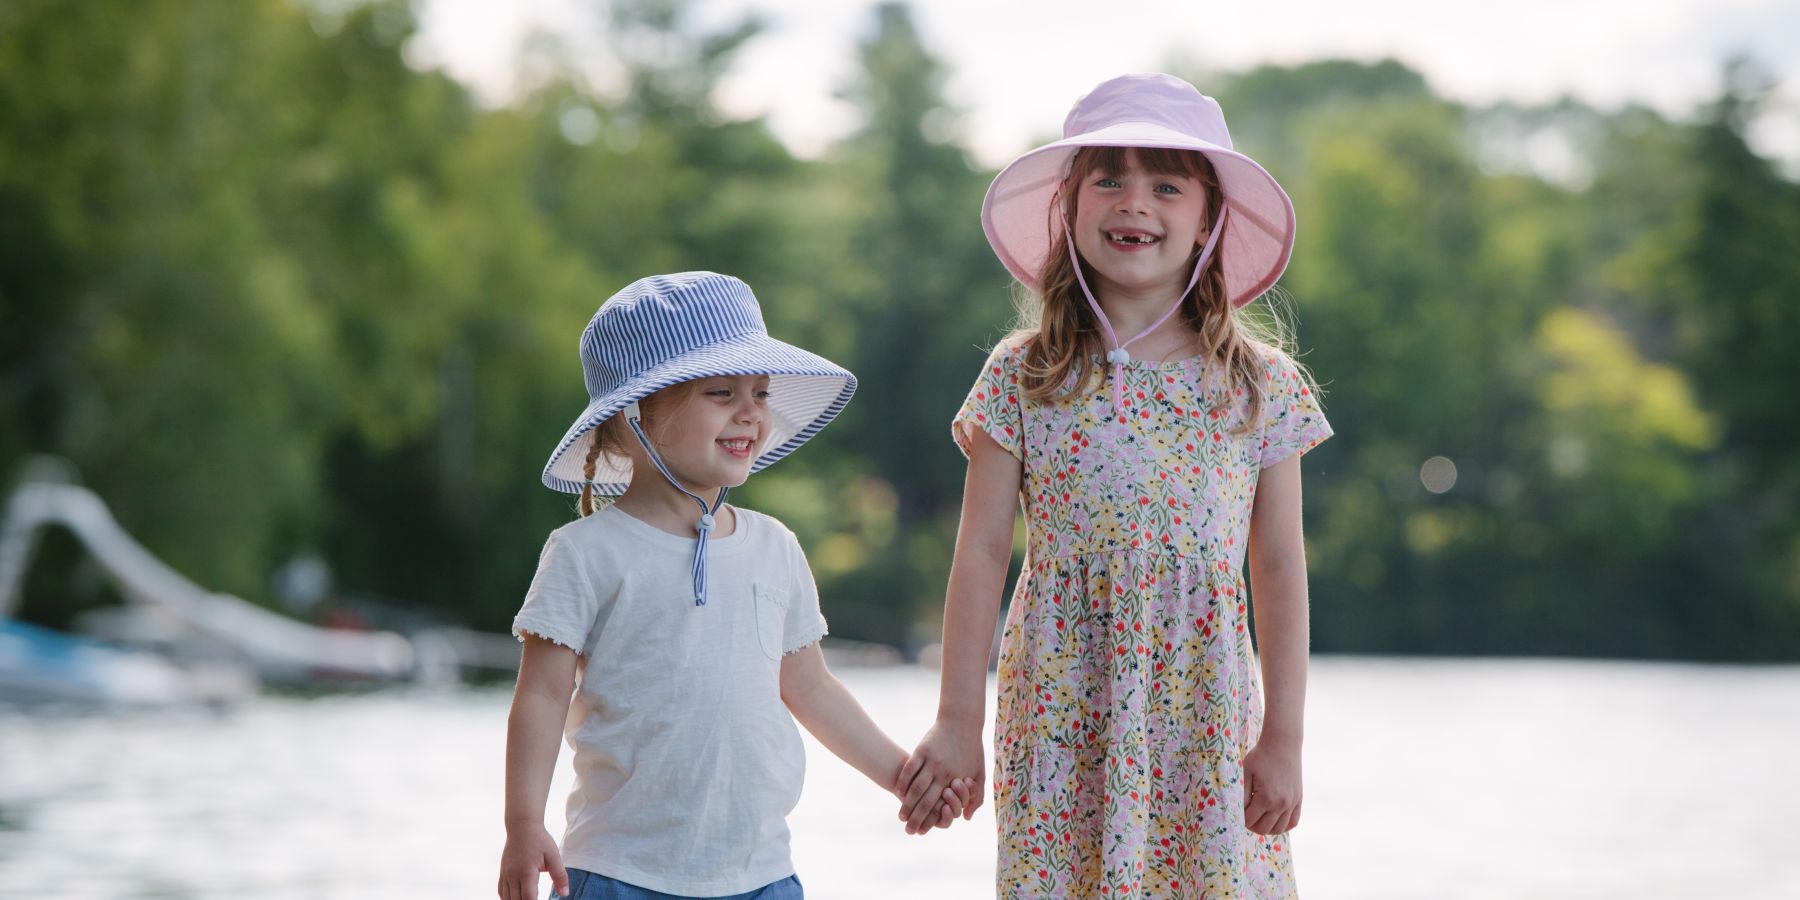 Sun protection hats for infants, toddlers and kids of all ages.  Rated UPF50+ Excellent Sun Protection-Machine Washable Durable Hats that don't wear out.  Chin ties with safety breakaway clips keep hats on heads. Made in Canada  by Puffin